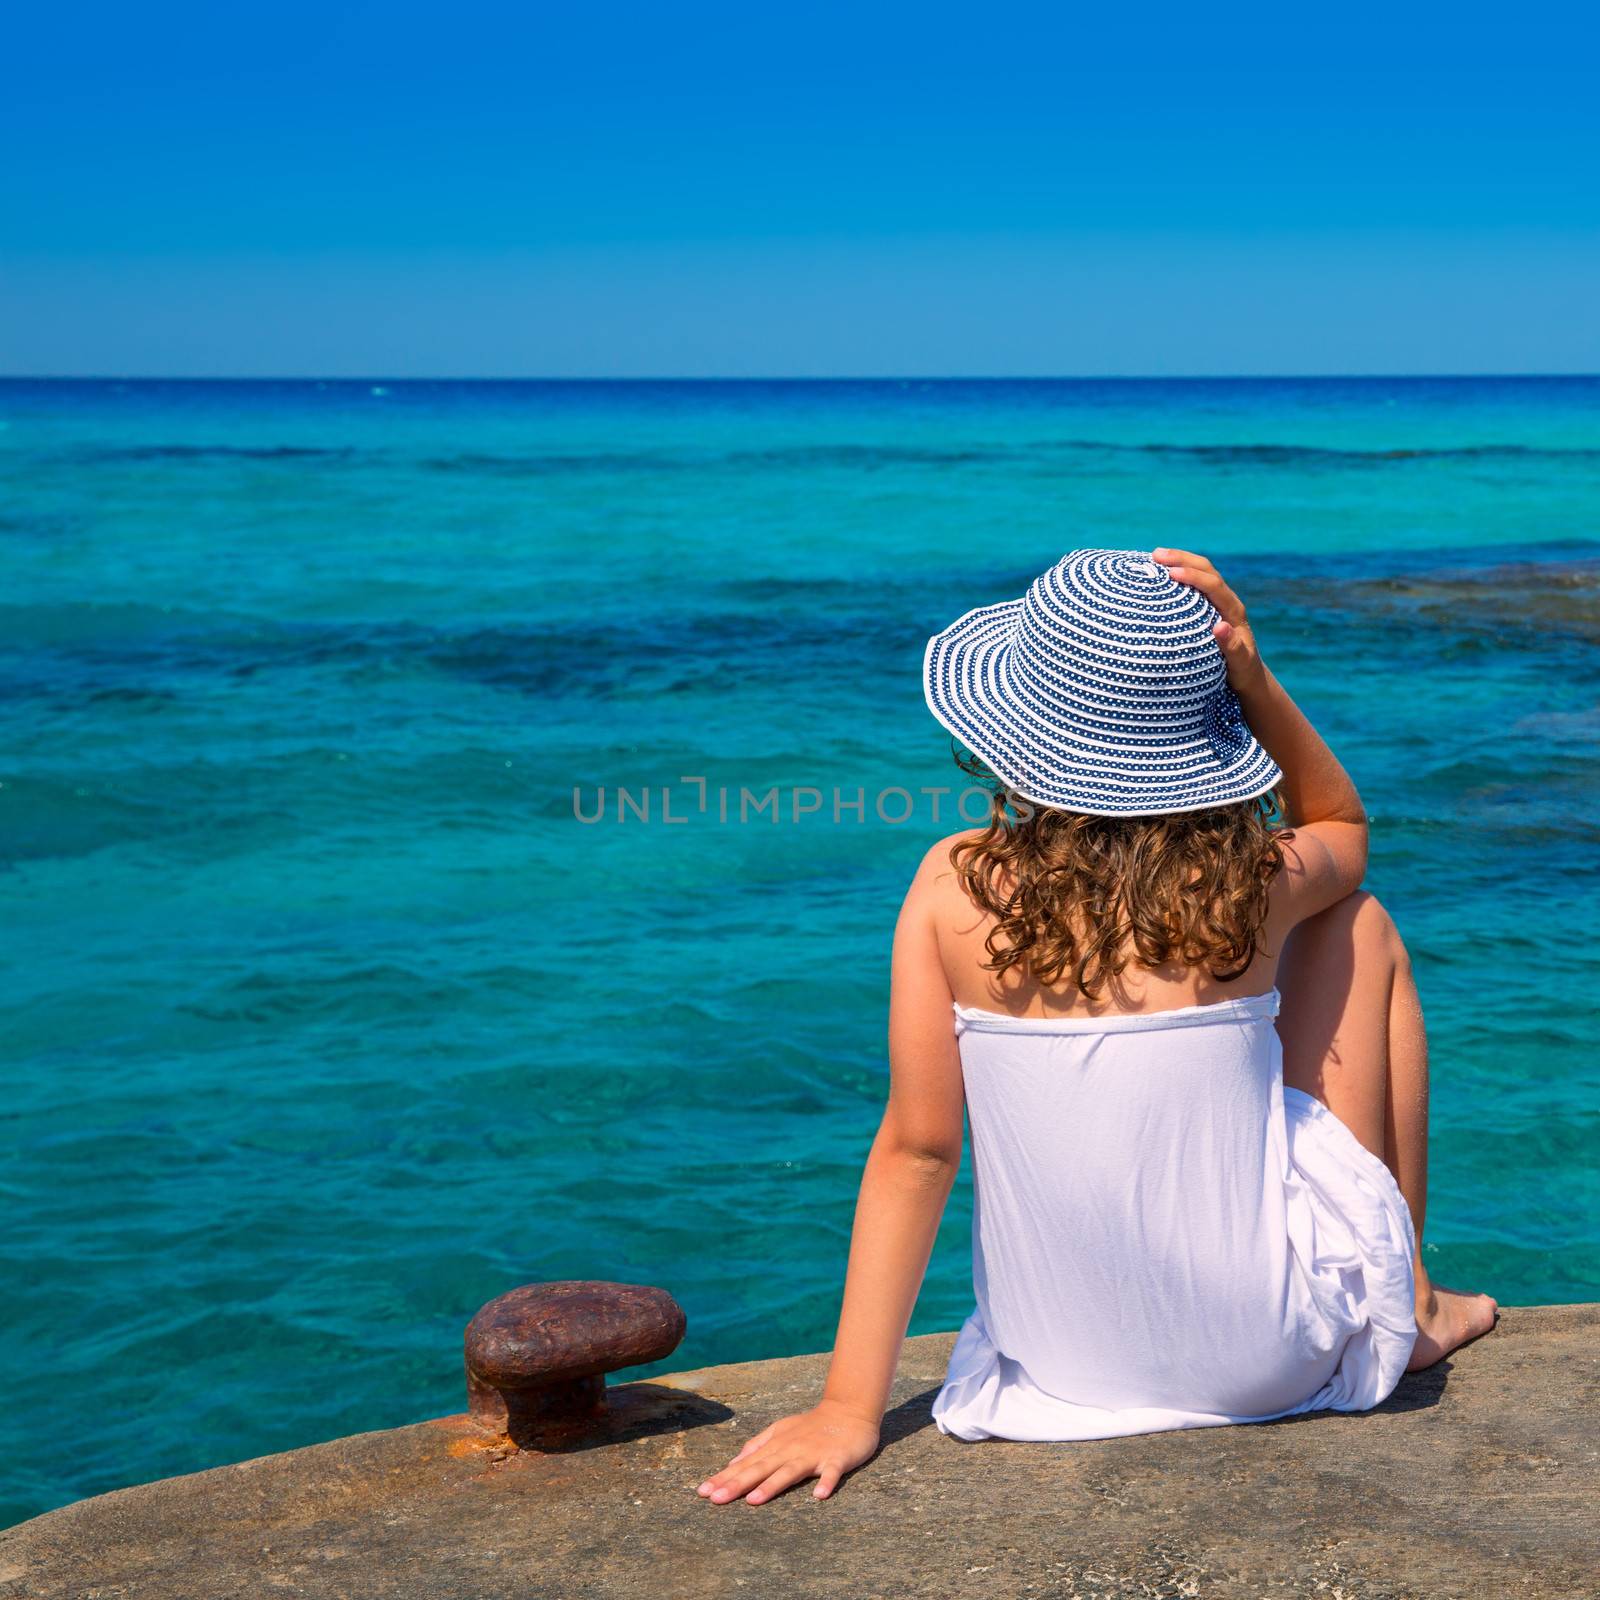 Girl looking at beach in Formentera turquoise Mediterranean sea background